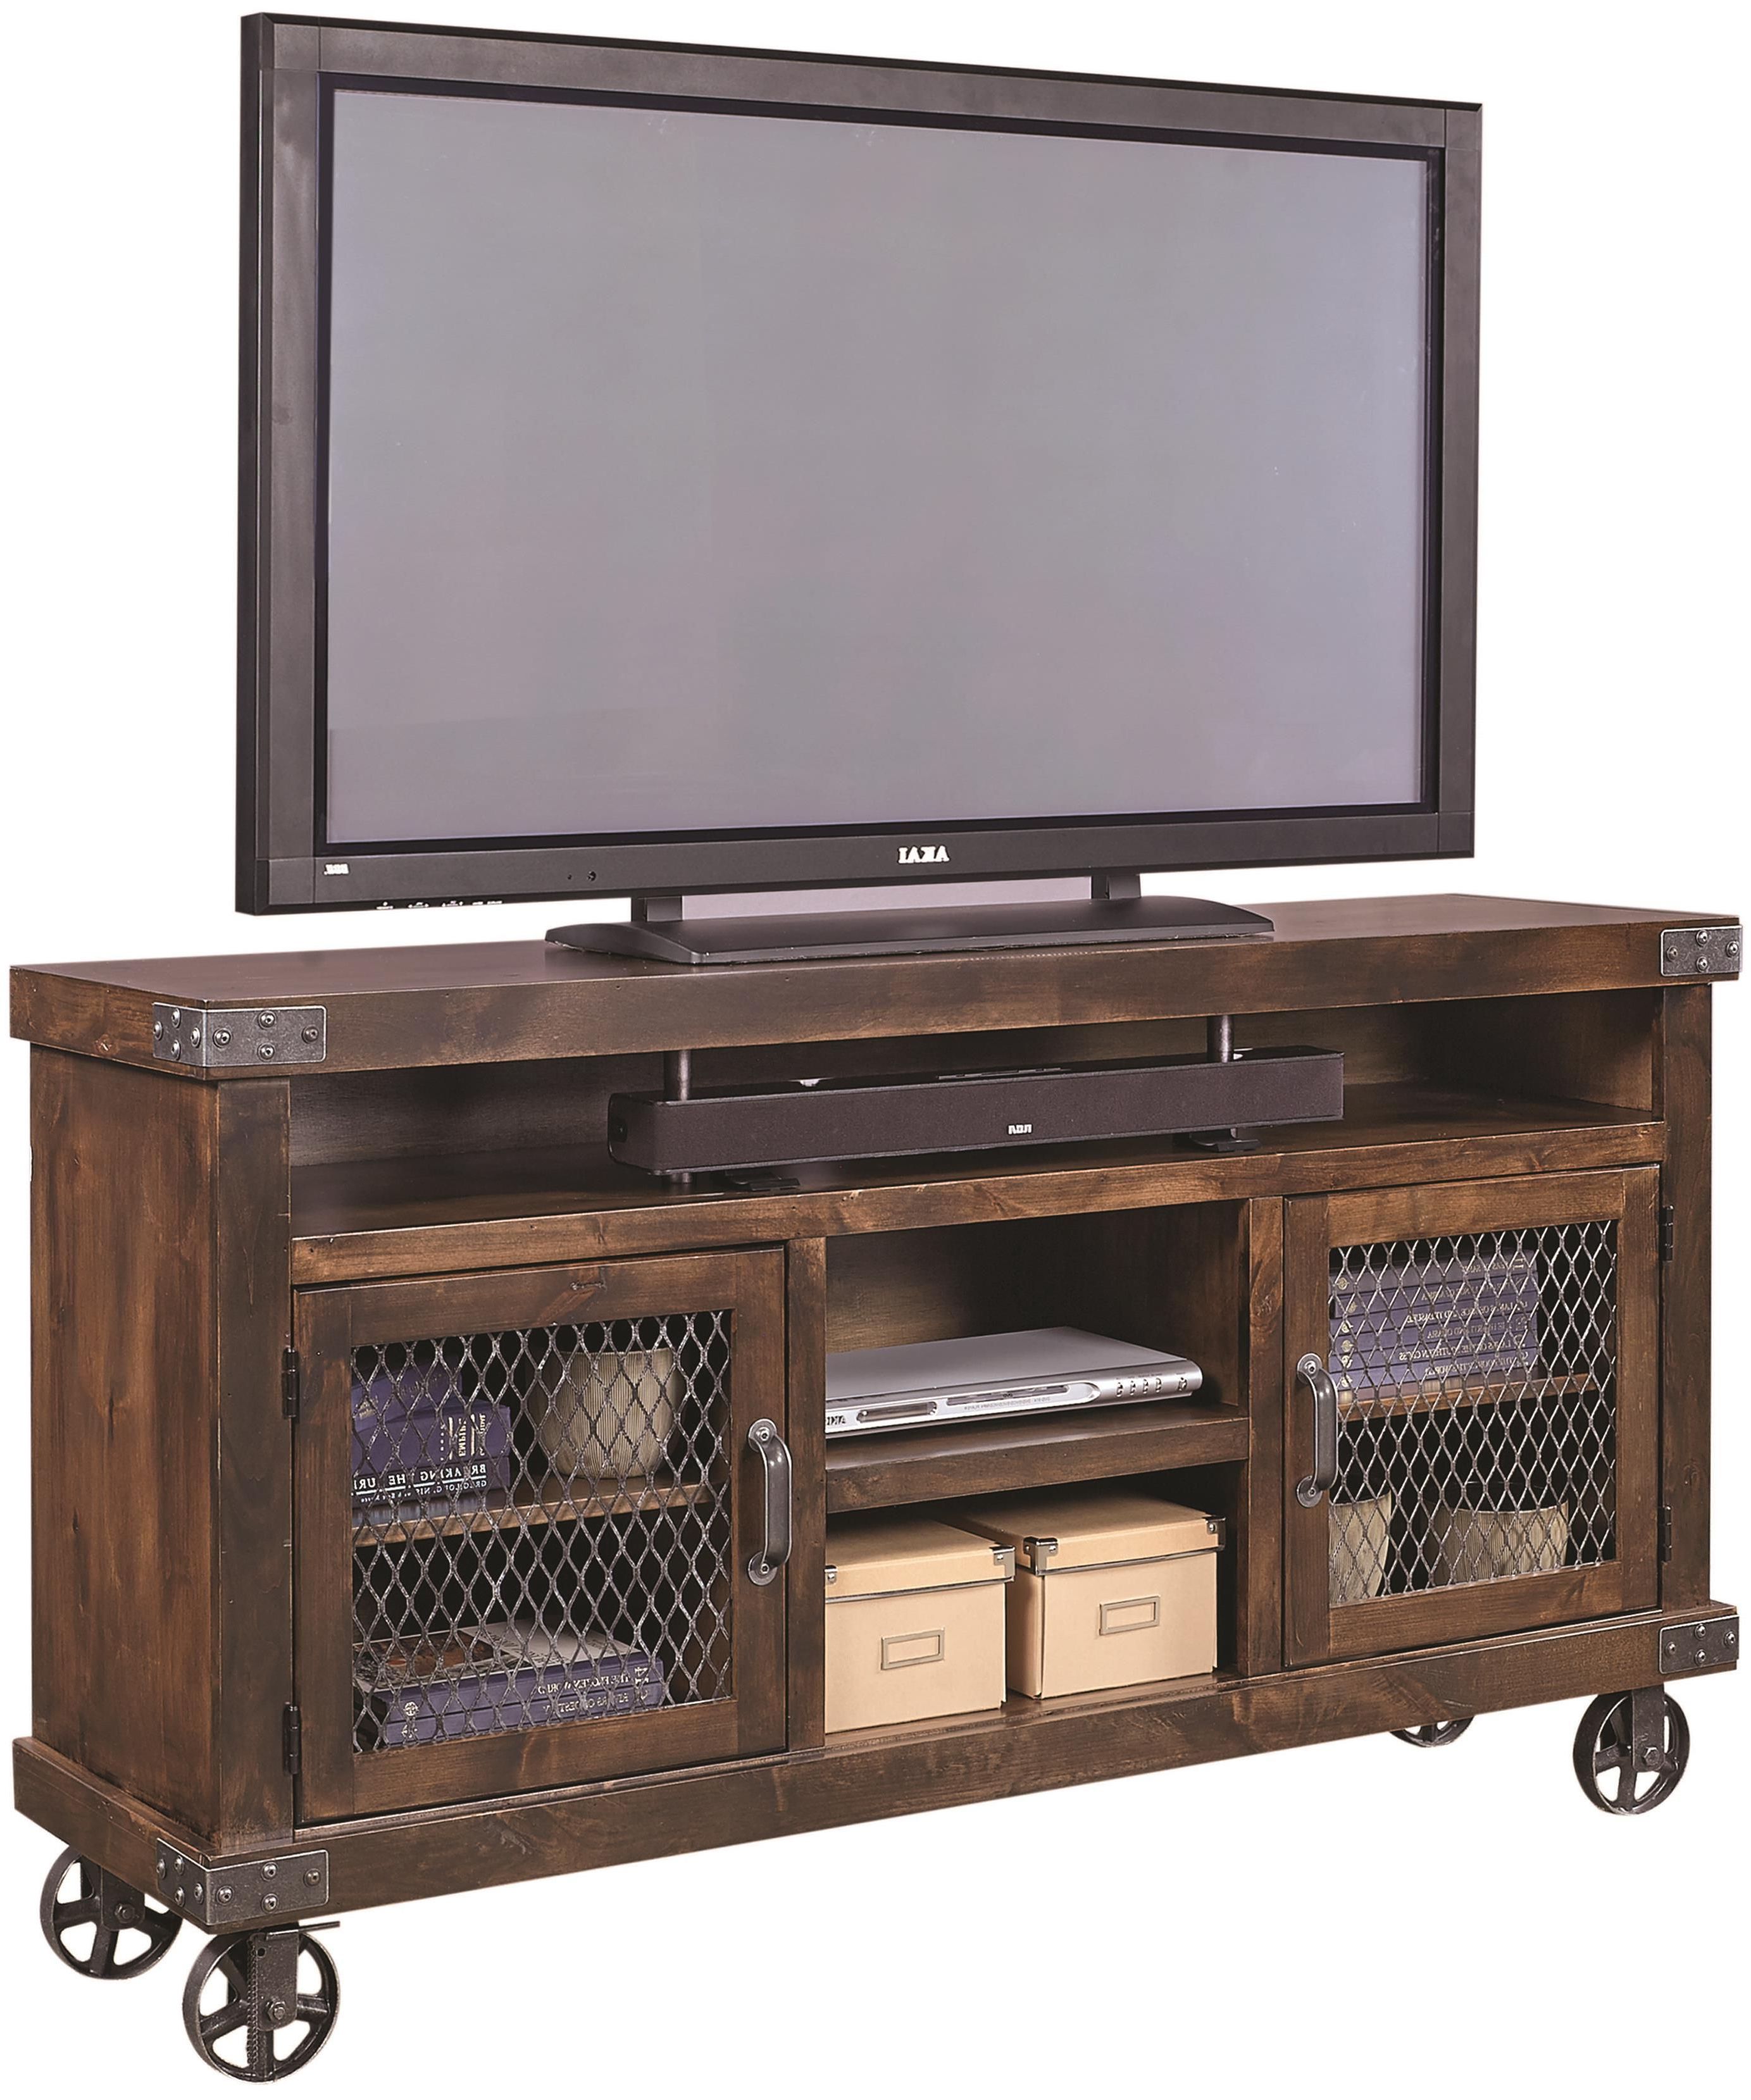 2018 Rustic Wood Tv Cabinets With Industrial 65" Console With Metal Castersaspenhome In  (View 8 of 20)